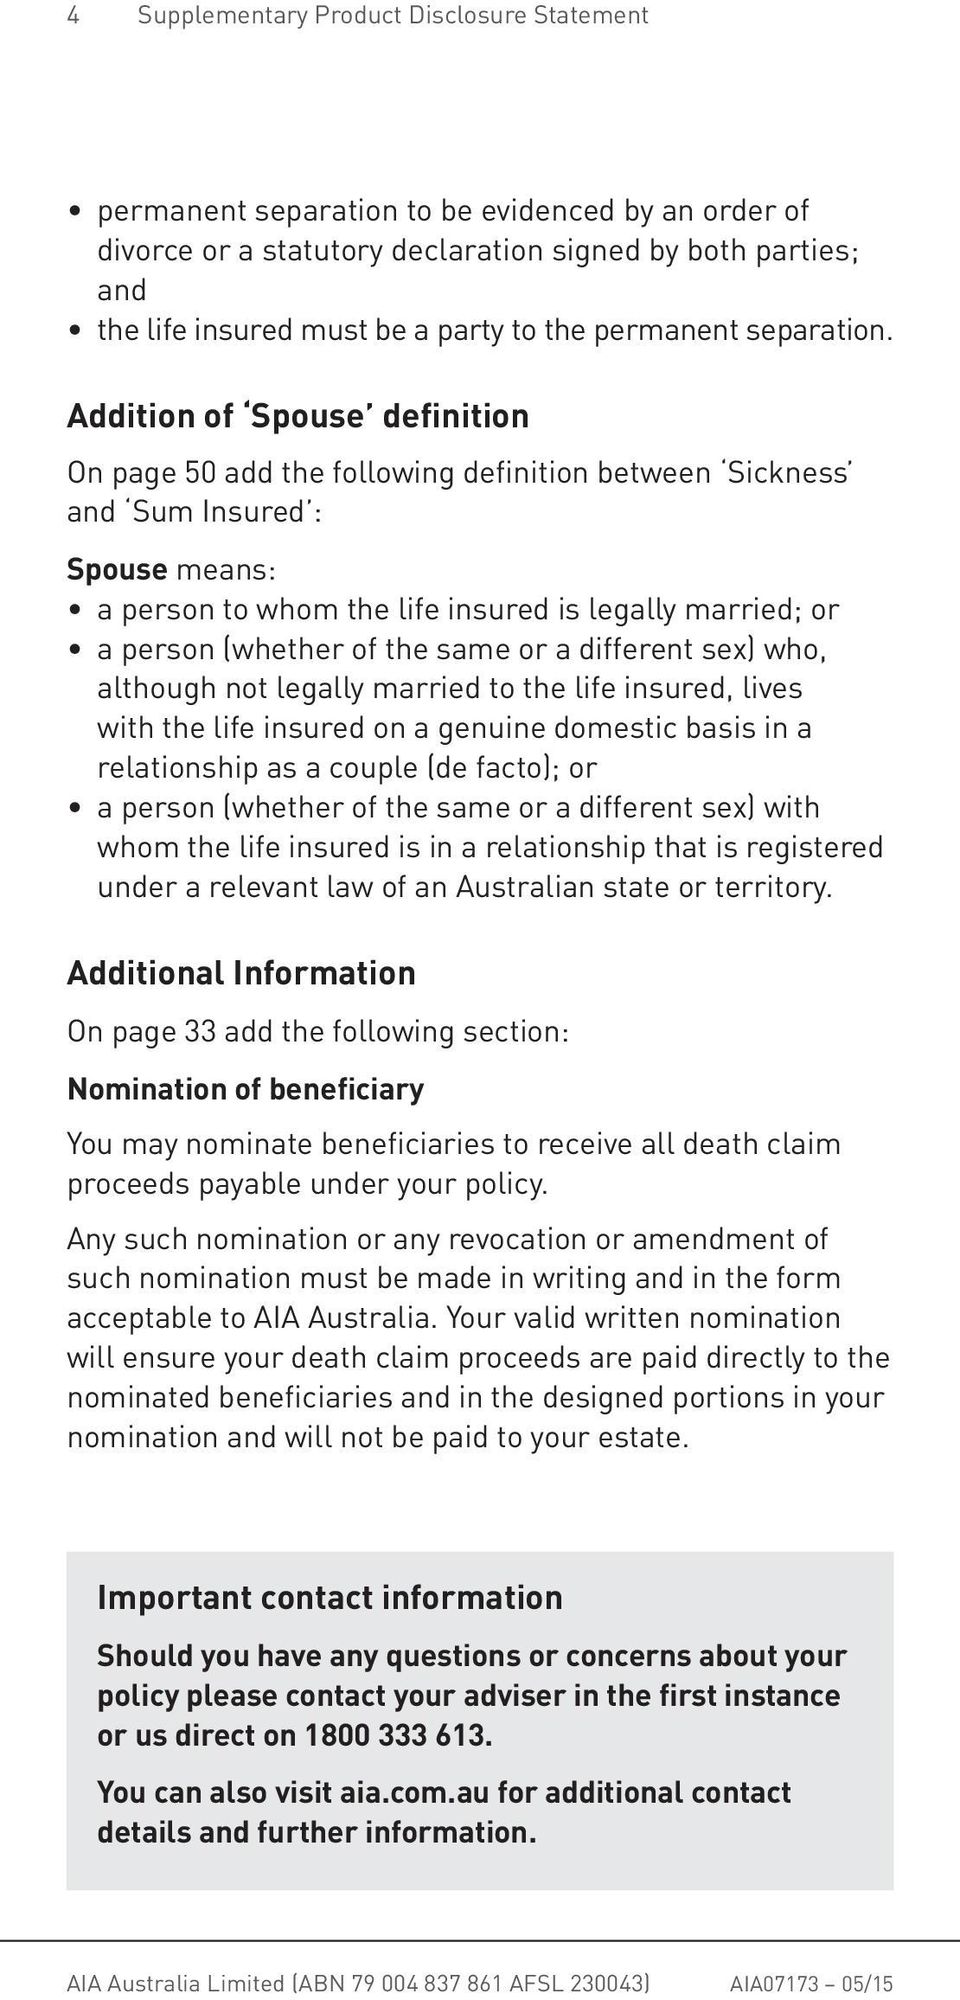 Addition of Spouse definition On page 50 add the following definition between Sickness and Sum Insured : Spouse means: a person to whom the life insured is legally married; or a person (whether of